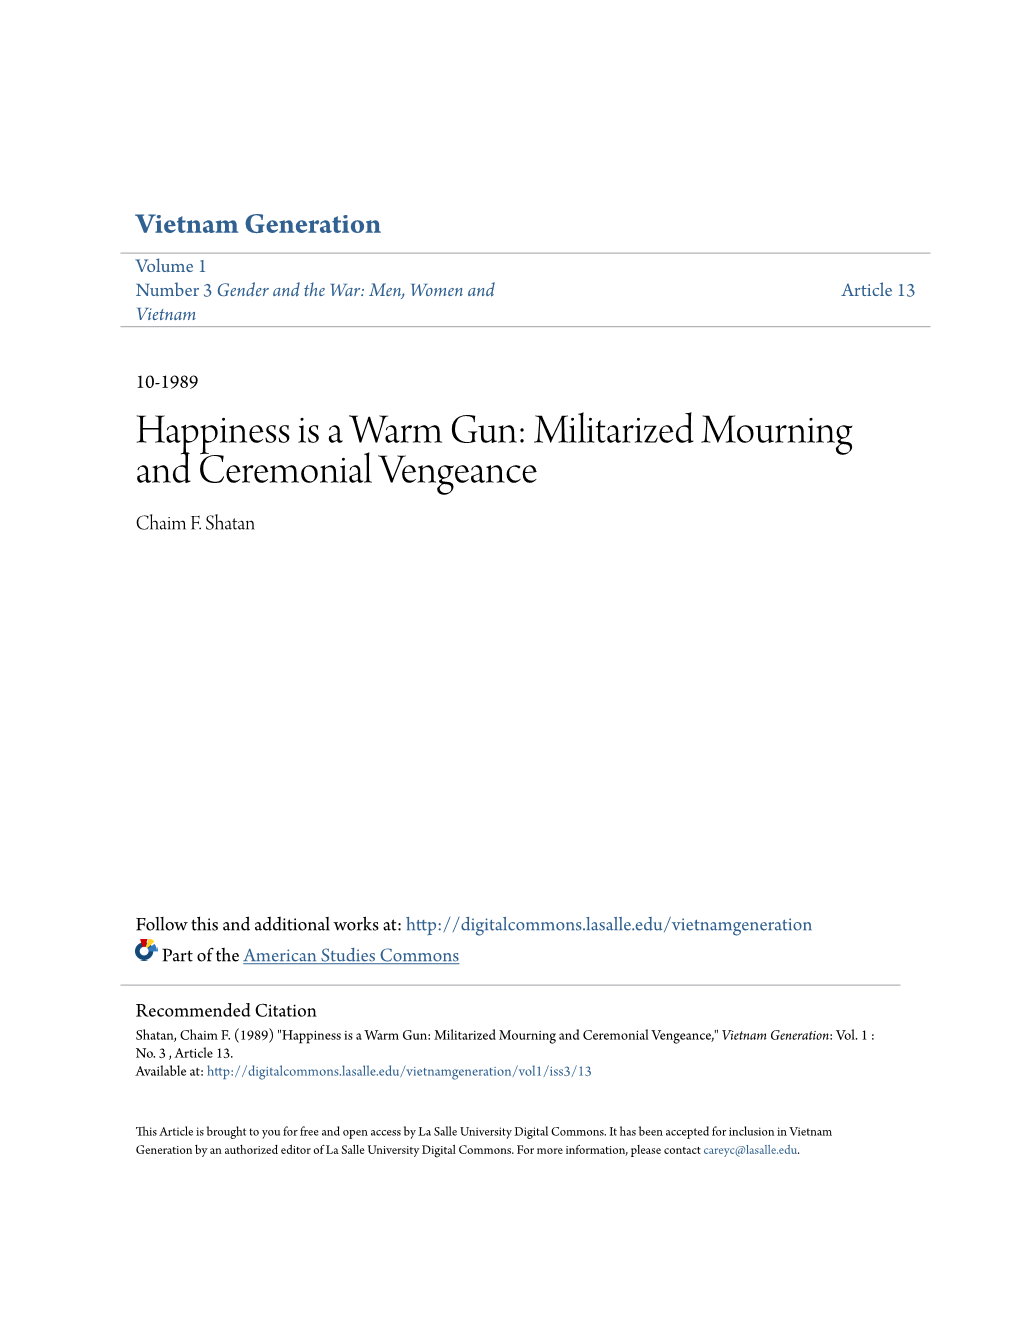 Happiness Is a Warm Gun: Militarized Mourning and Ceremonial Vengeance Chaim F